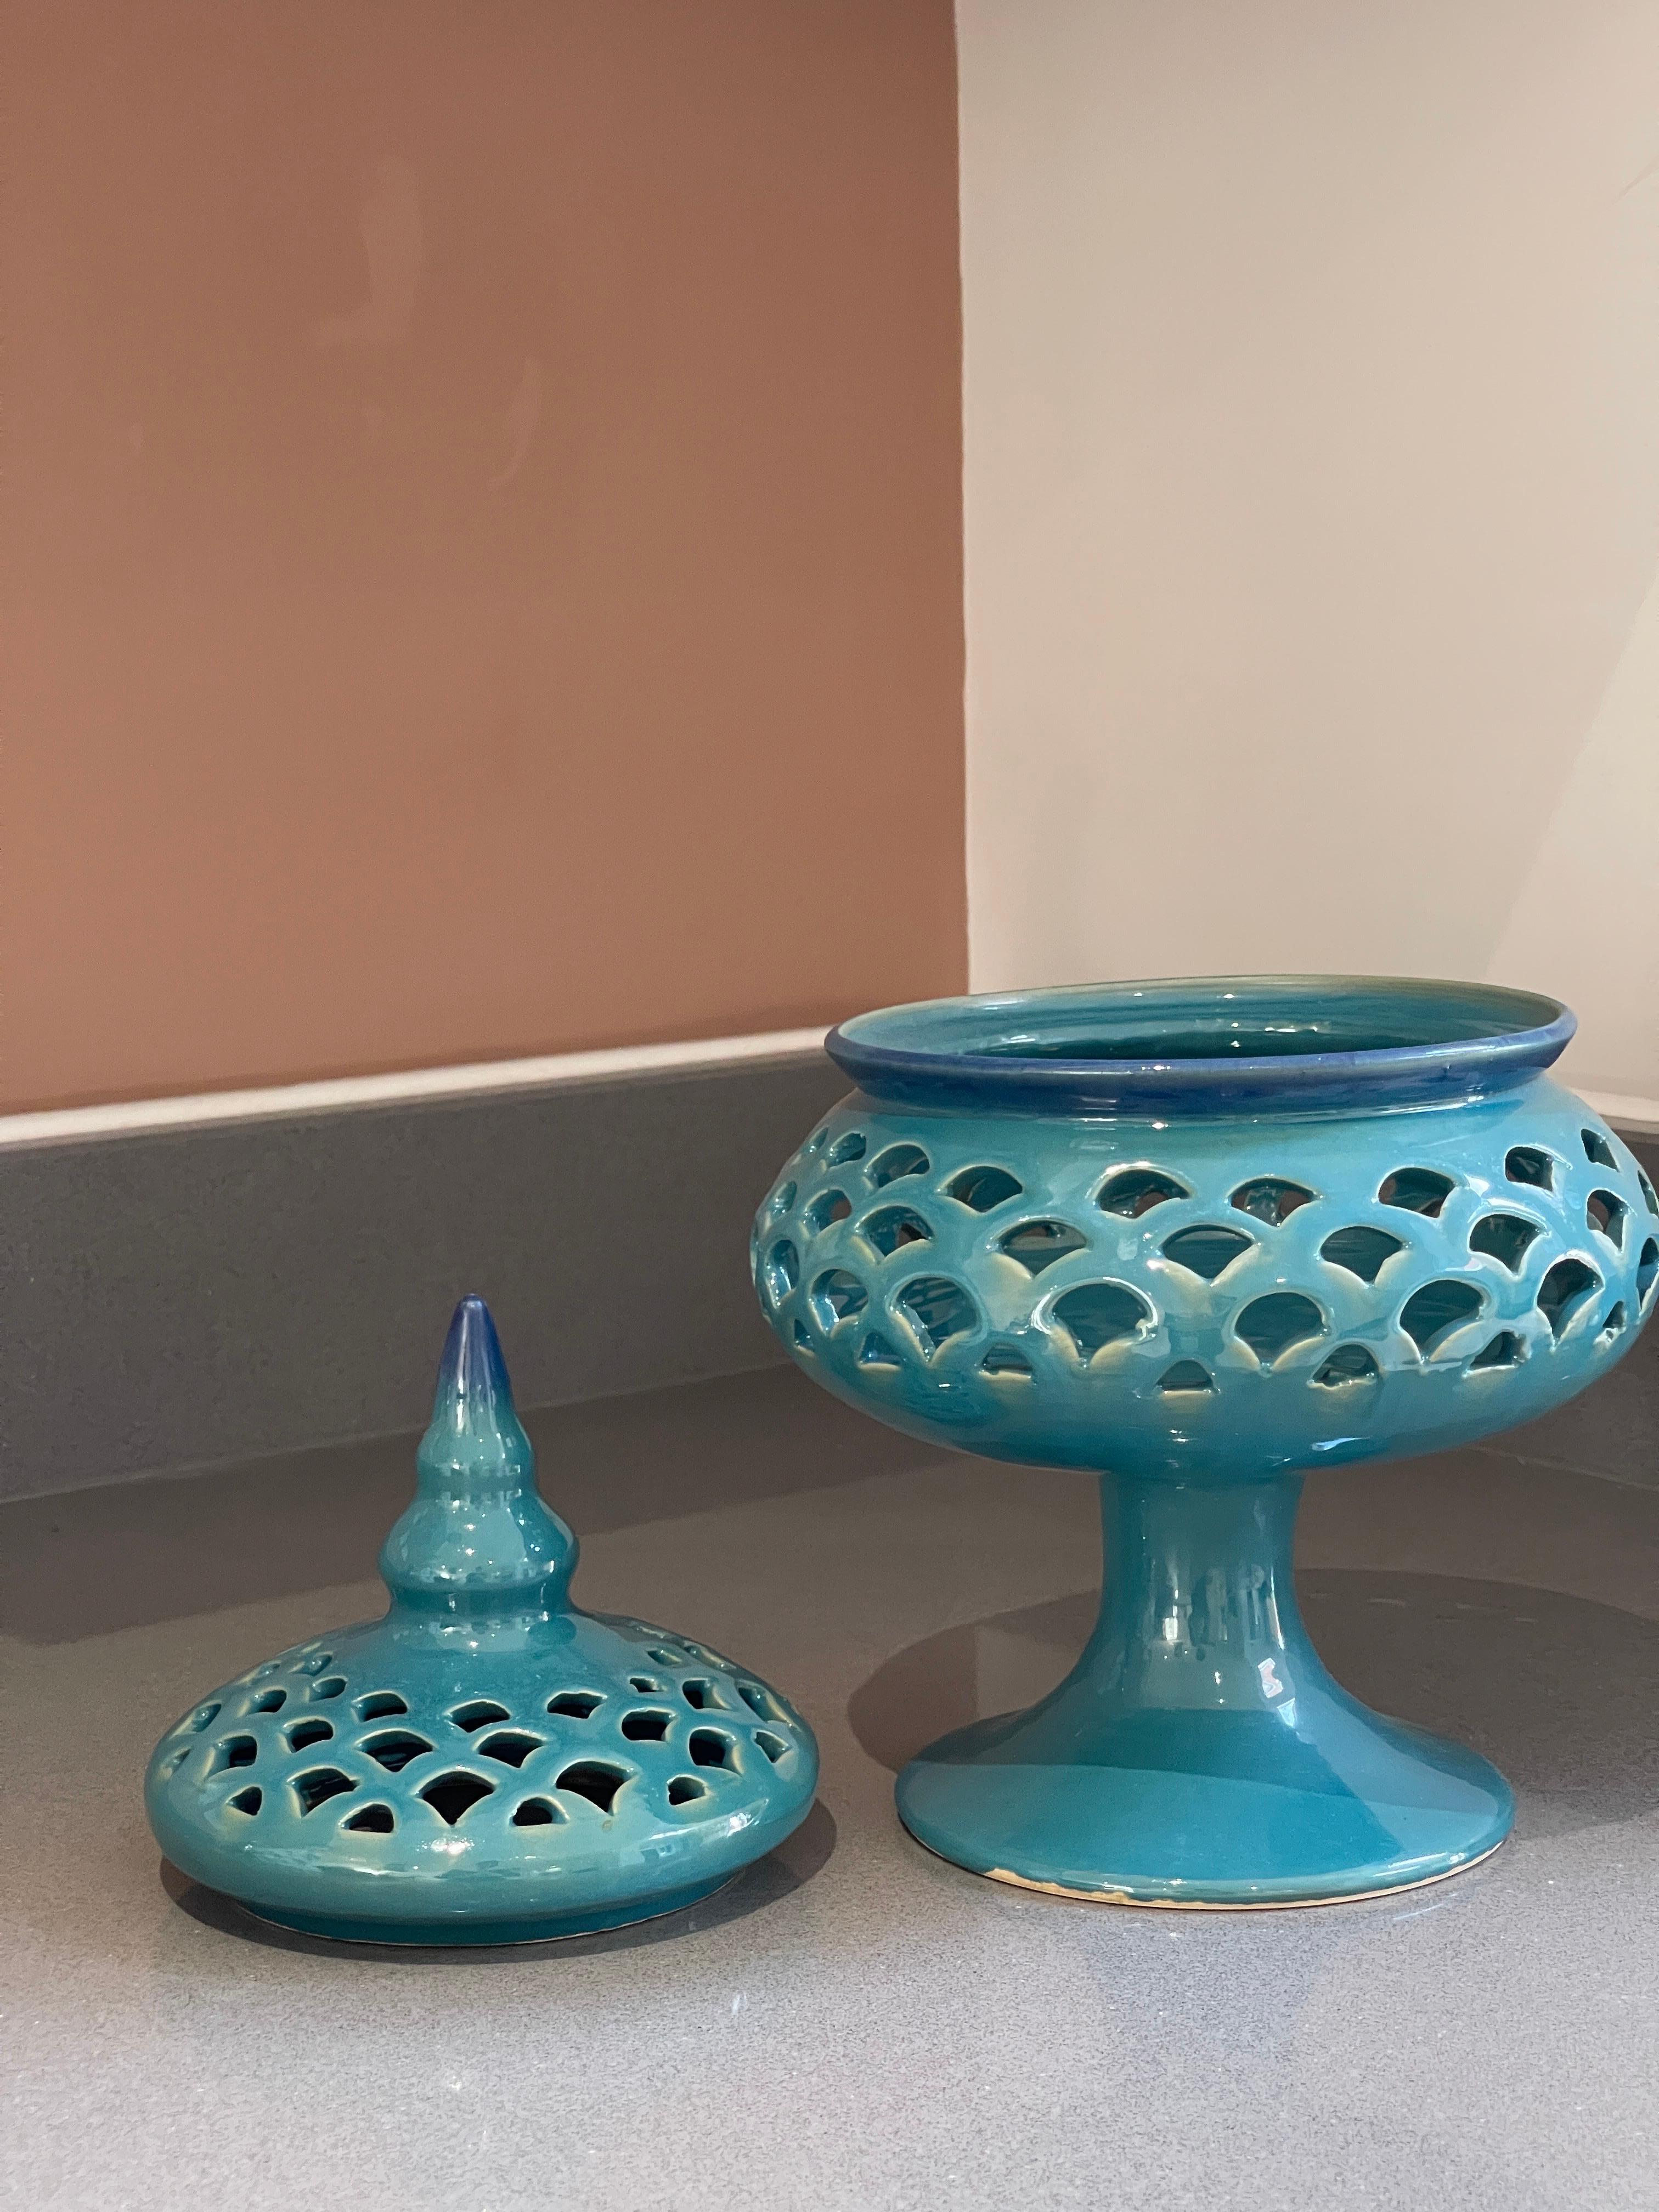 Candle Holder Hand Crafted Blue Ceramic Torches With Stand &Lid 2